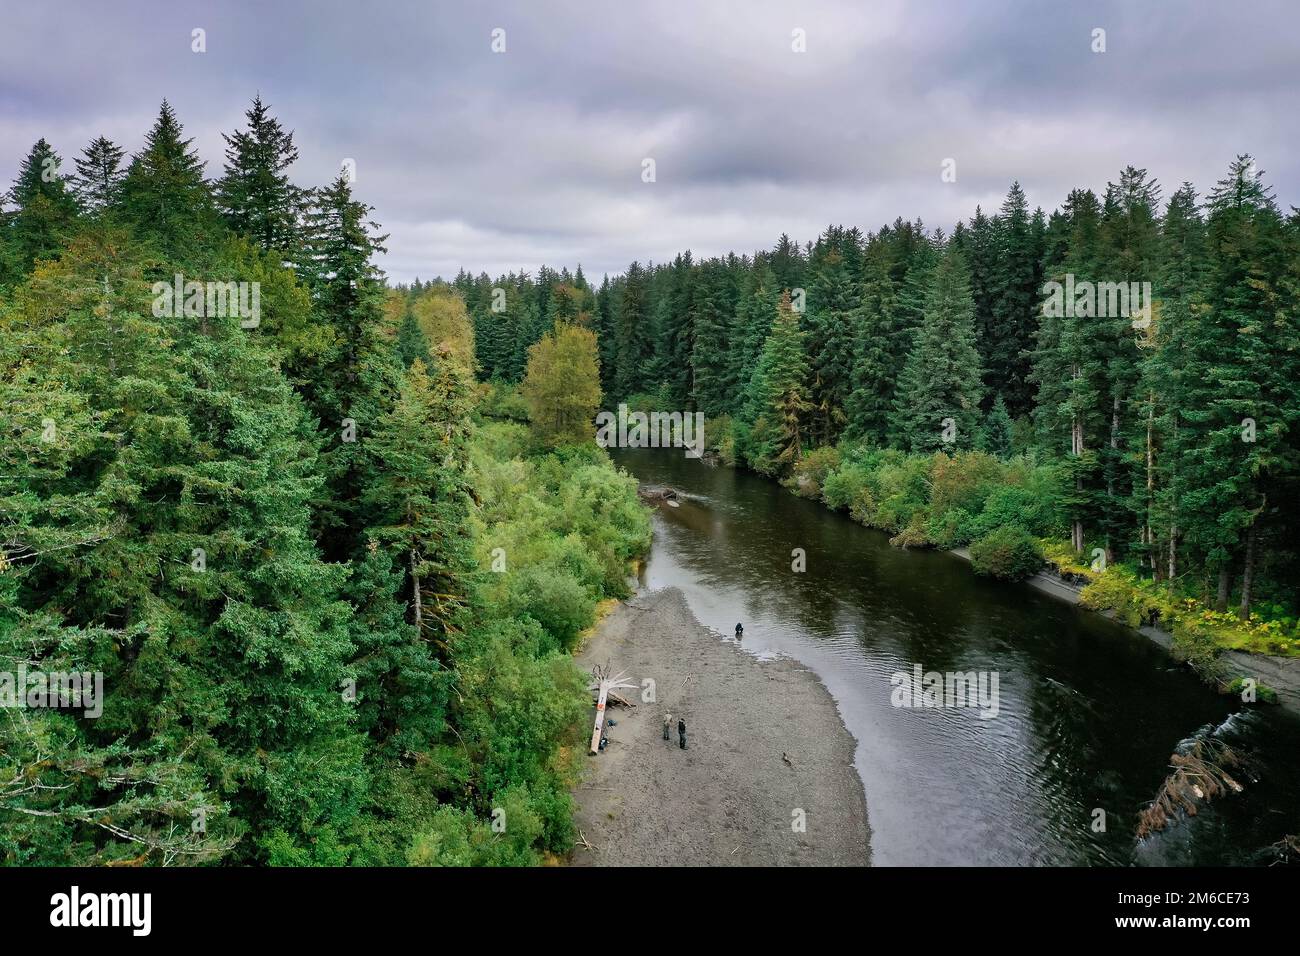 People fish along a river inside a green wilderness forest Stock Photo